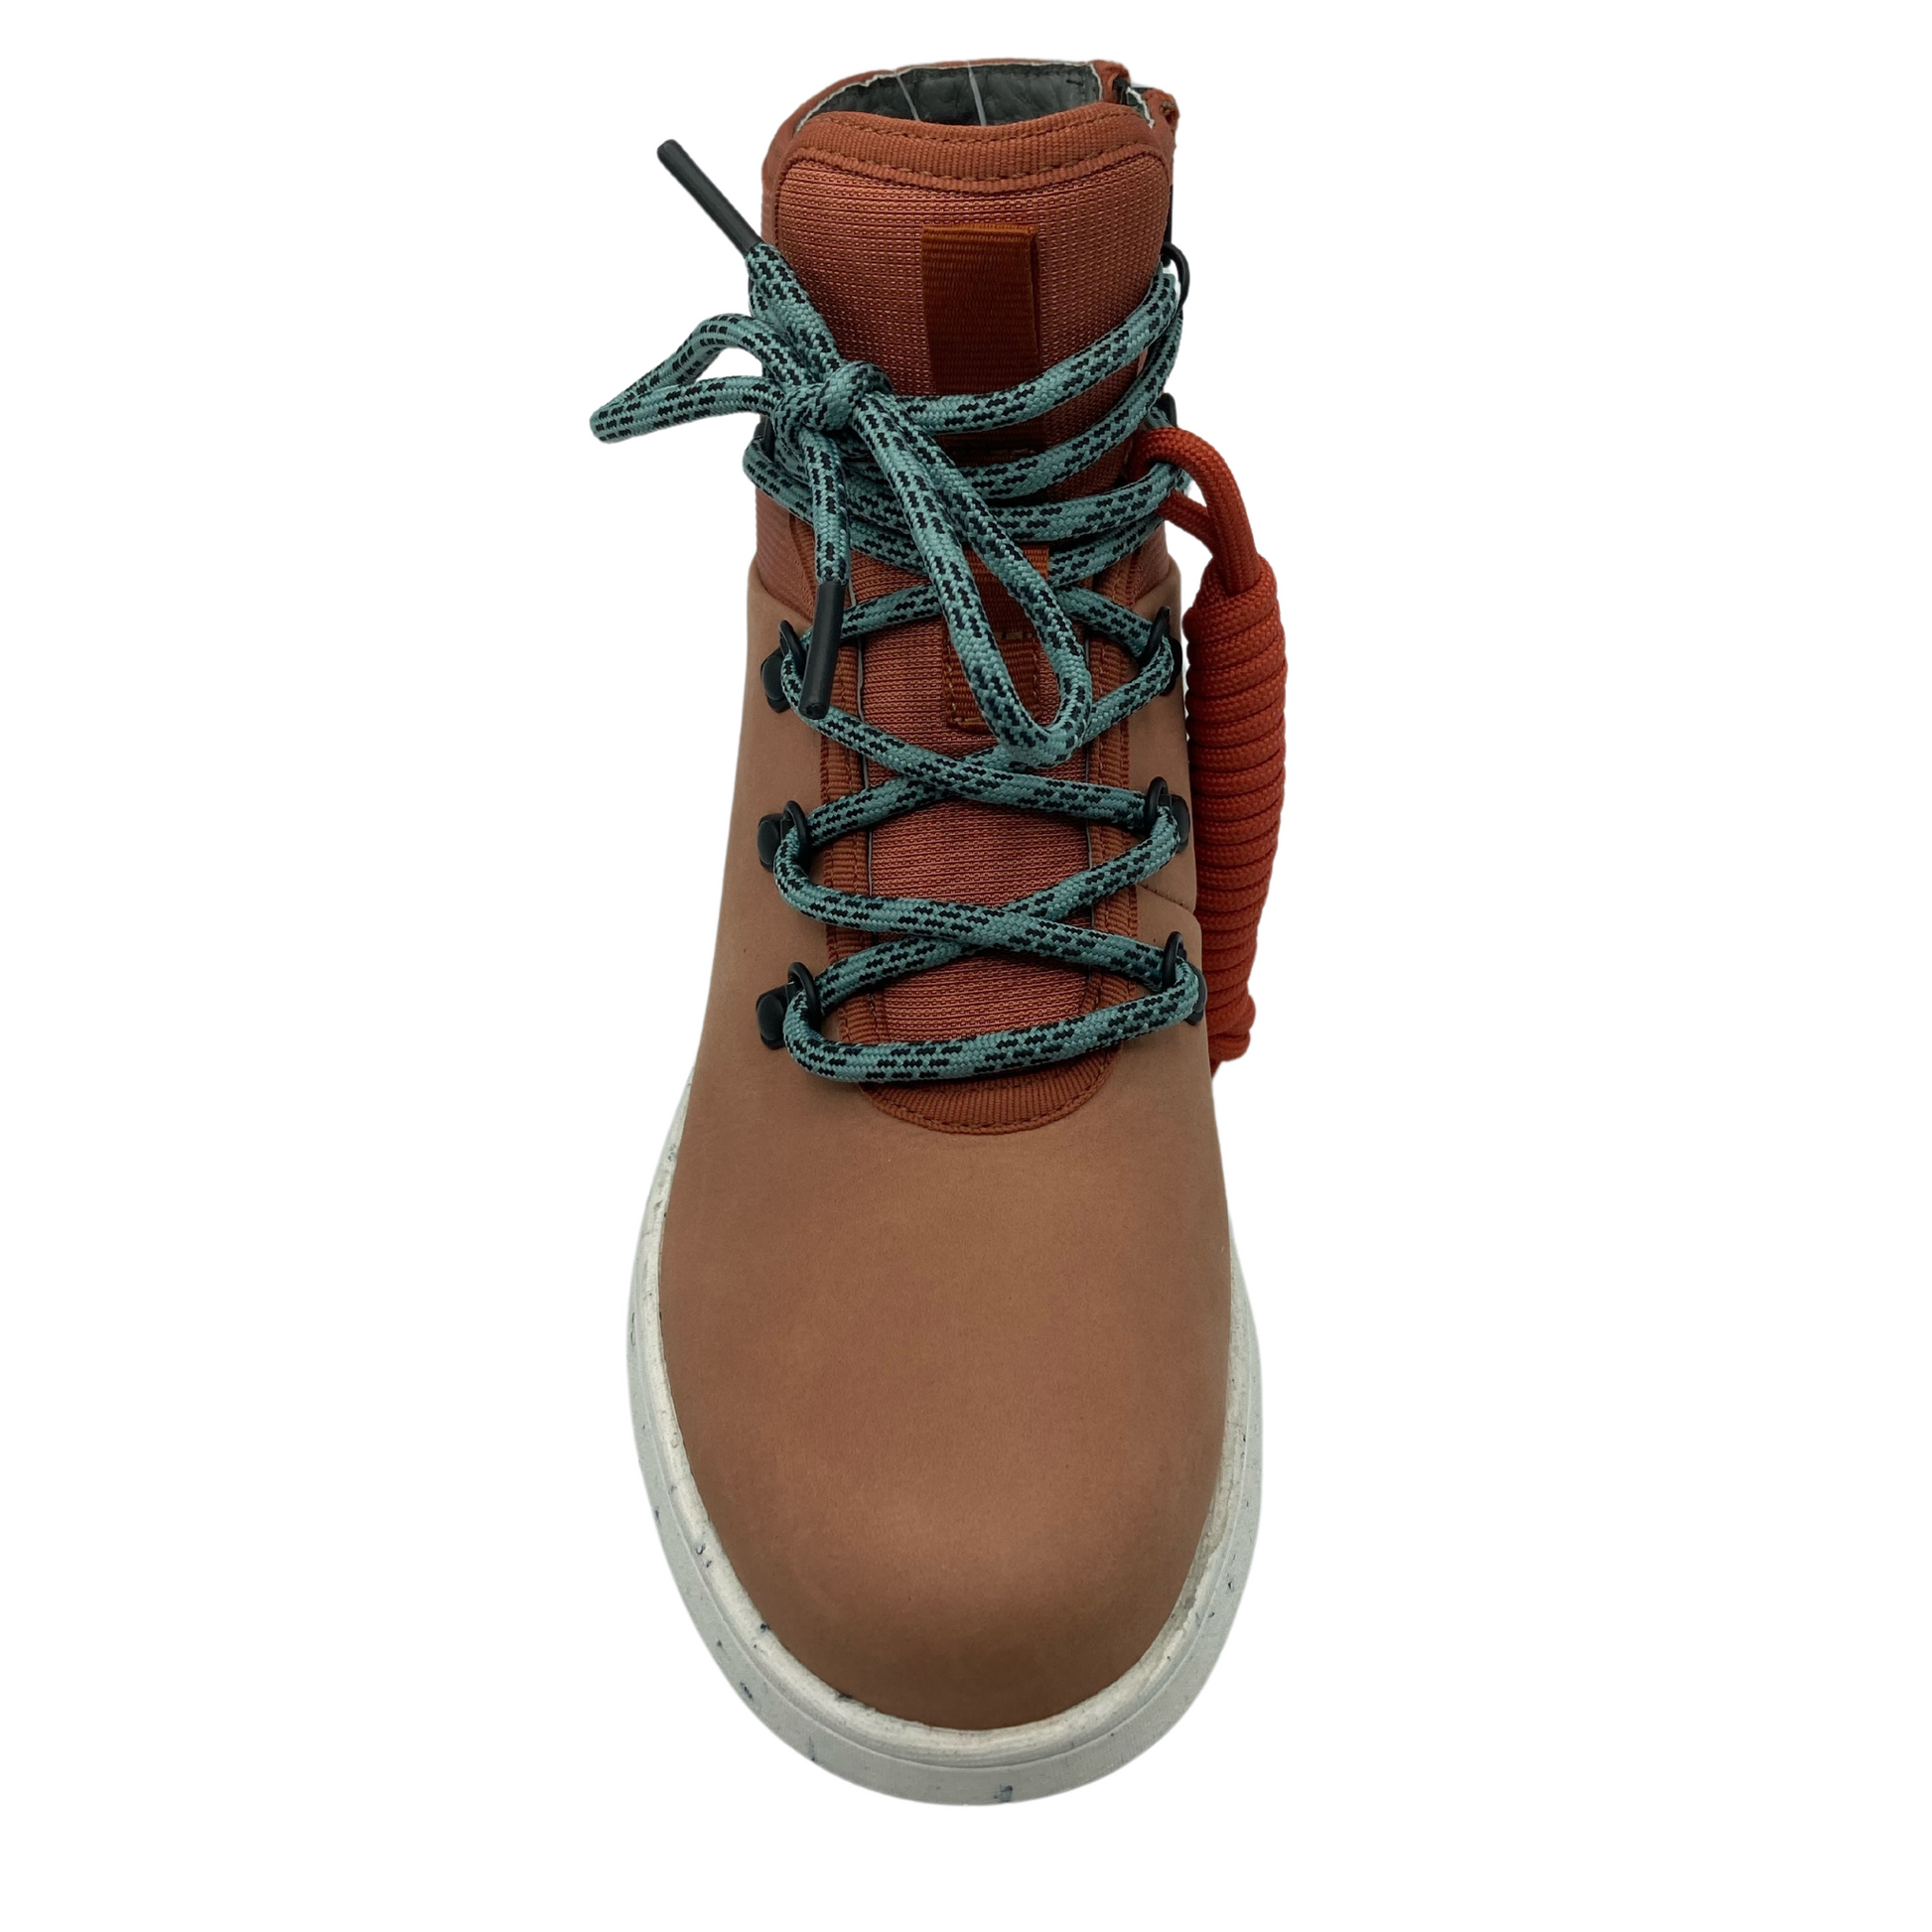 Top view of leather hiking boot with white outsole and teal laces